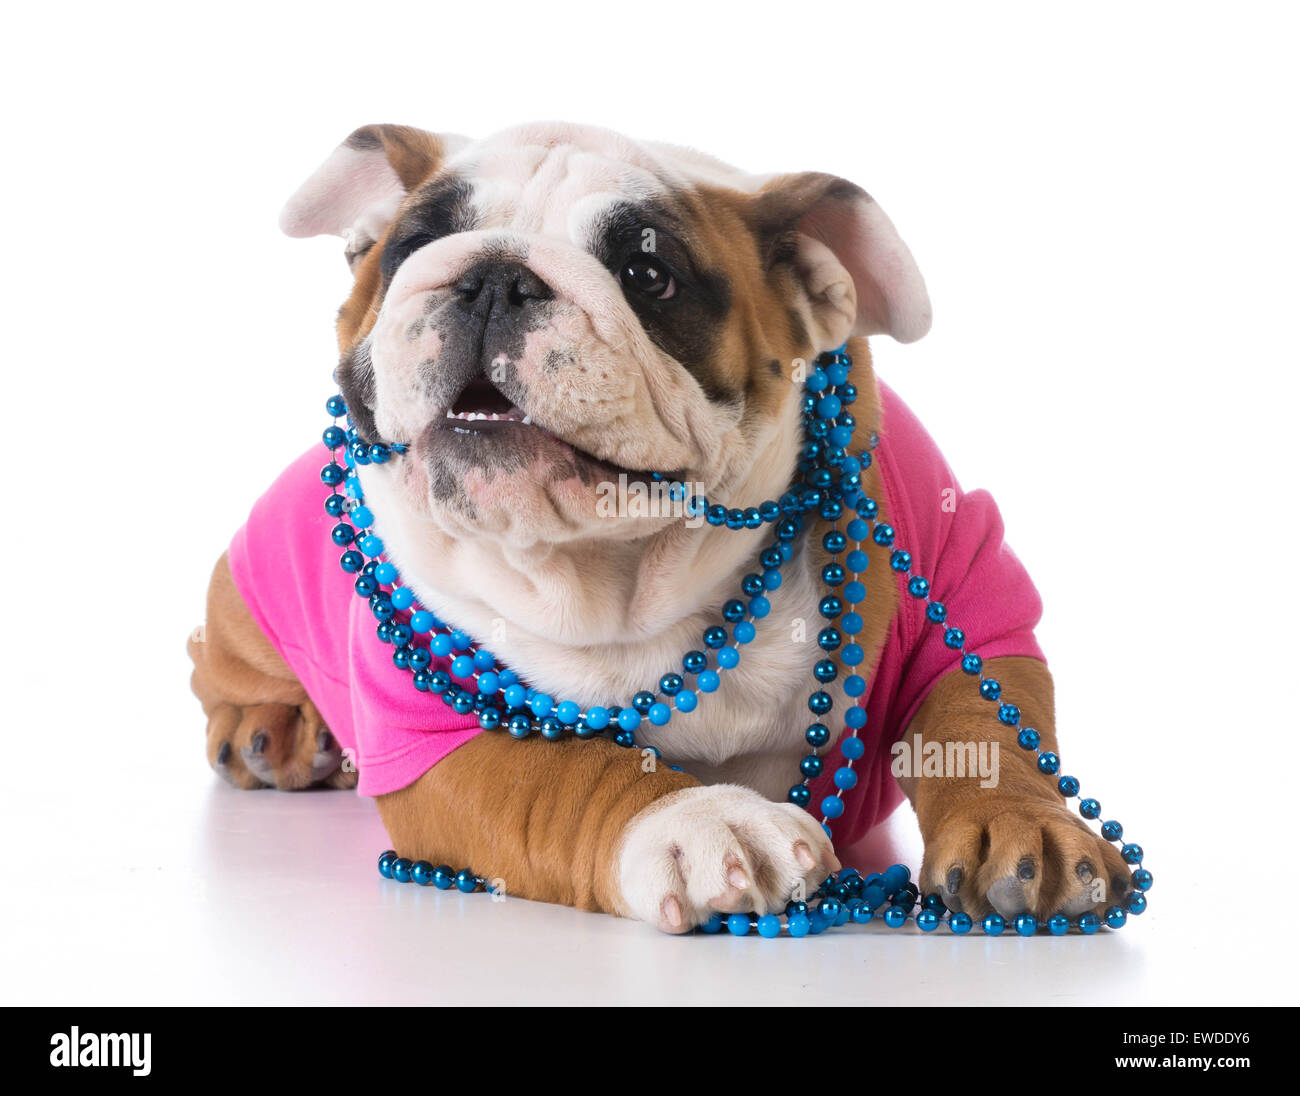 female puppy - bulldog wearing pink shirt and blue necklace on white background Stock Photo